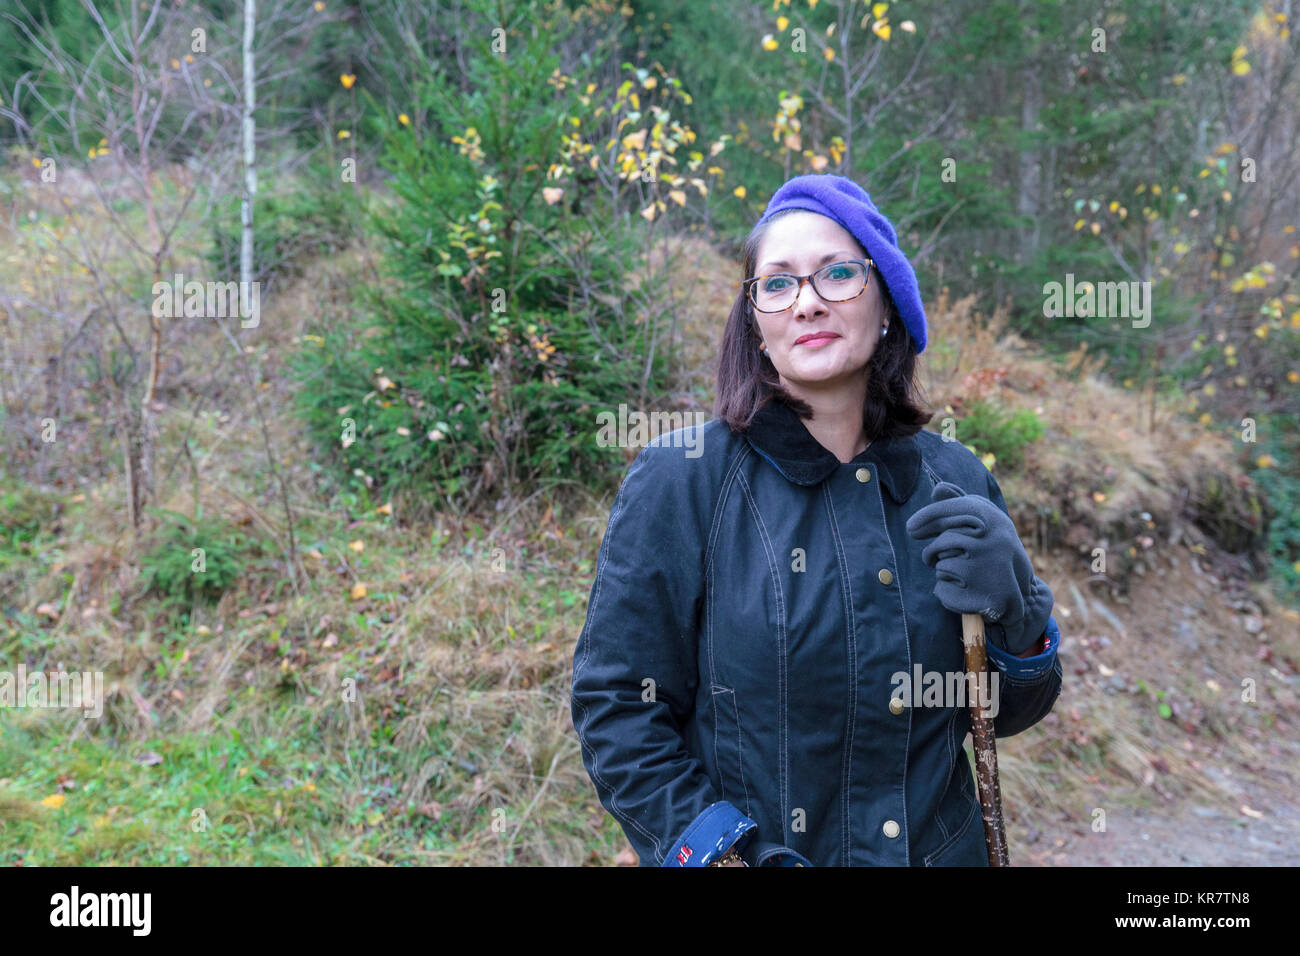 Lady with glasses wearing blue beret standing in the woods Stock Photo